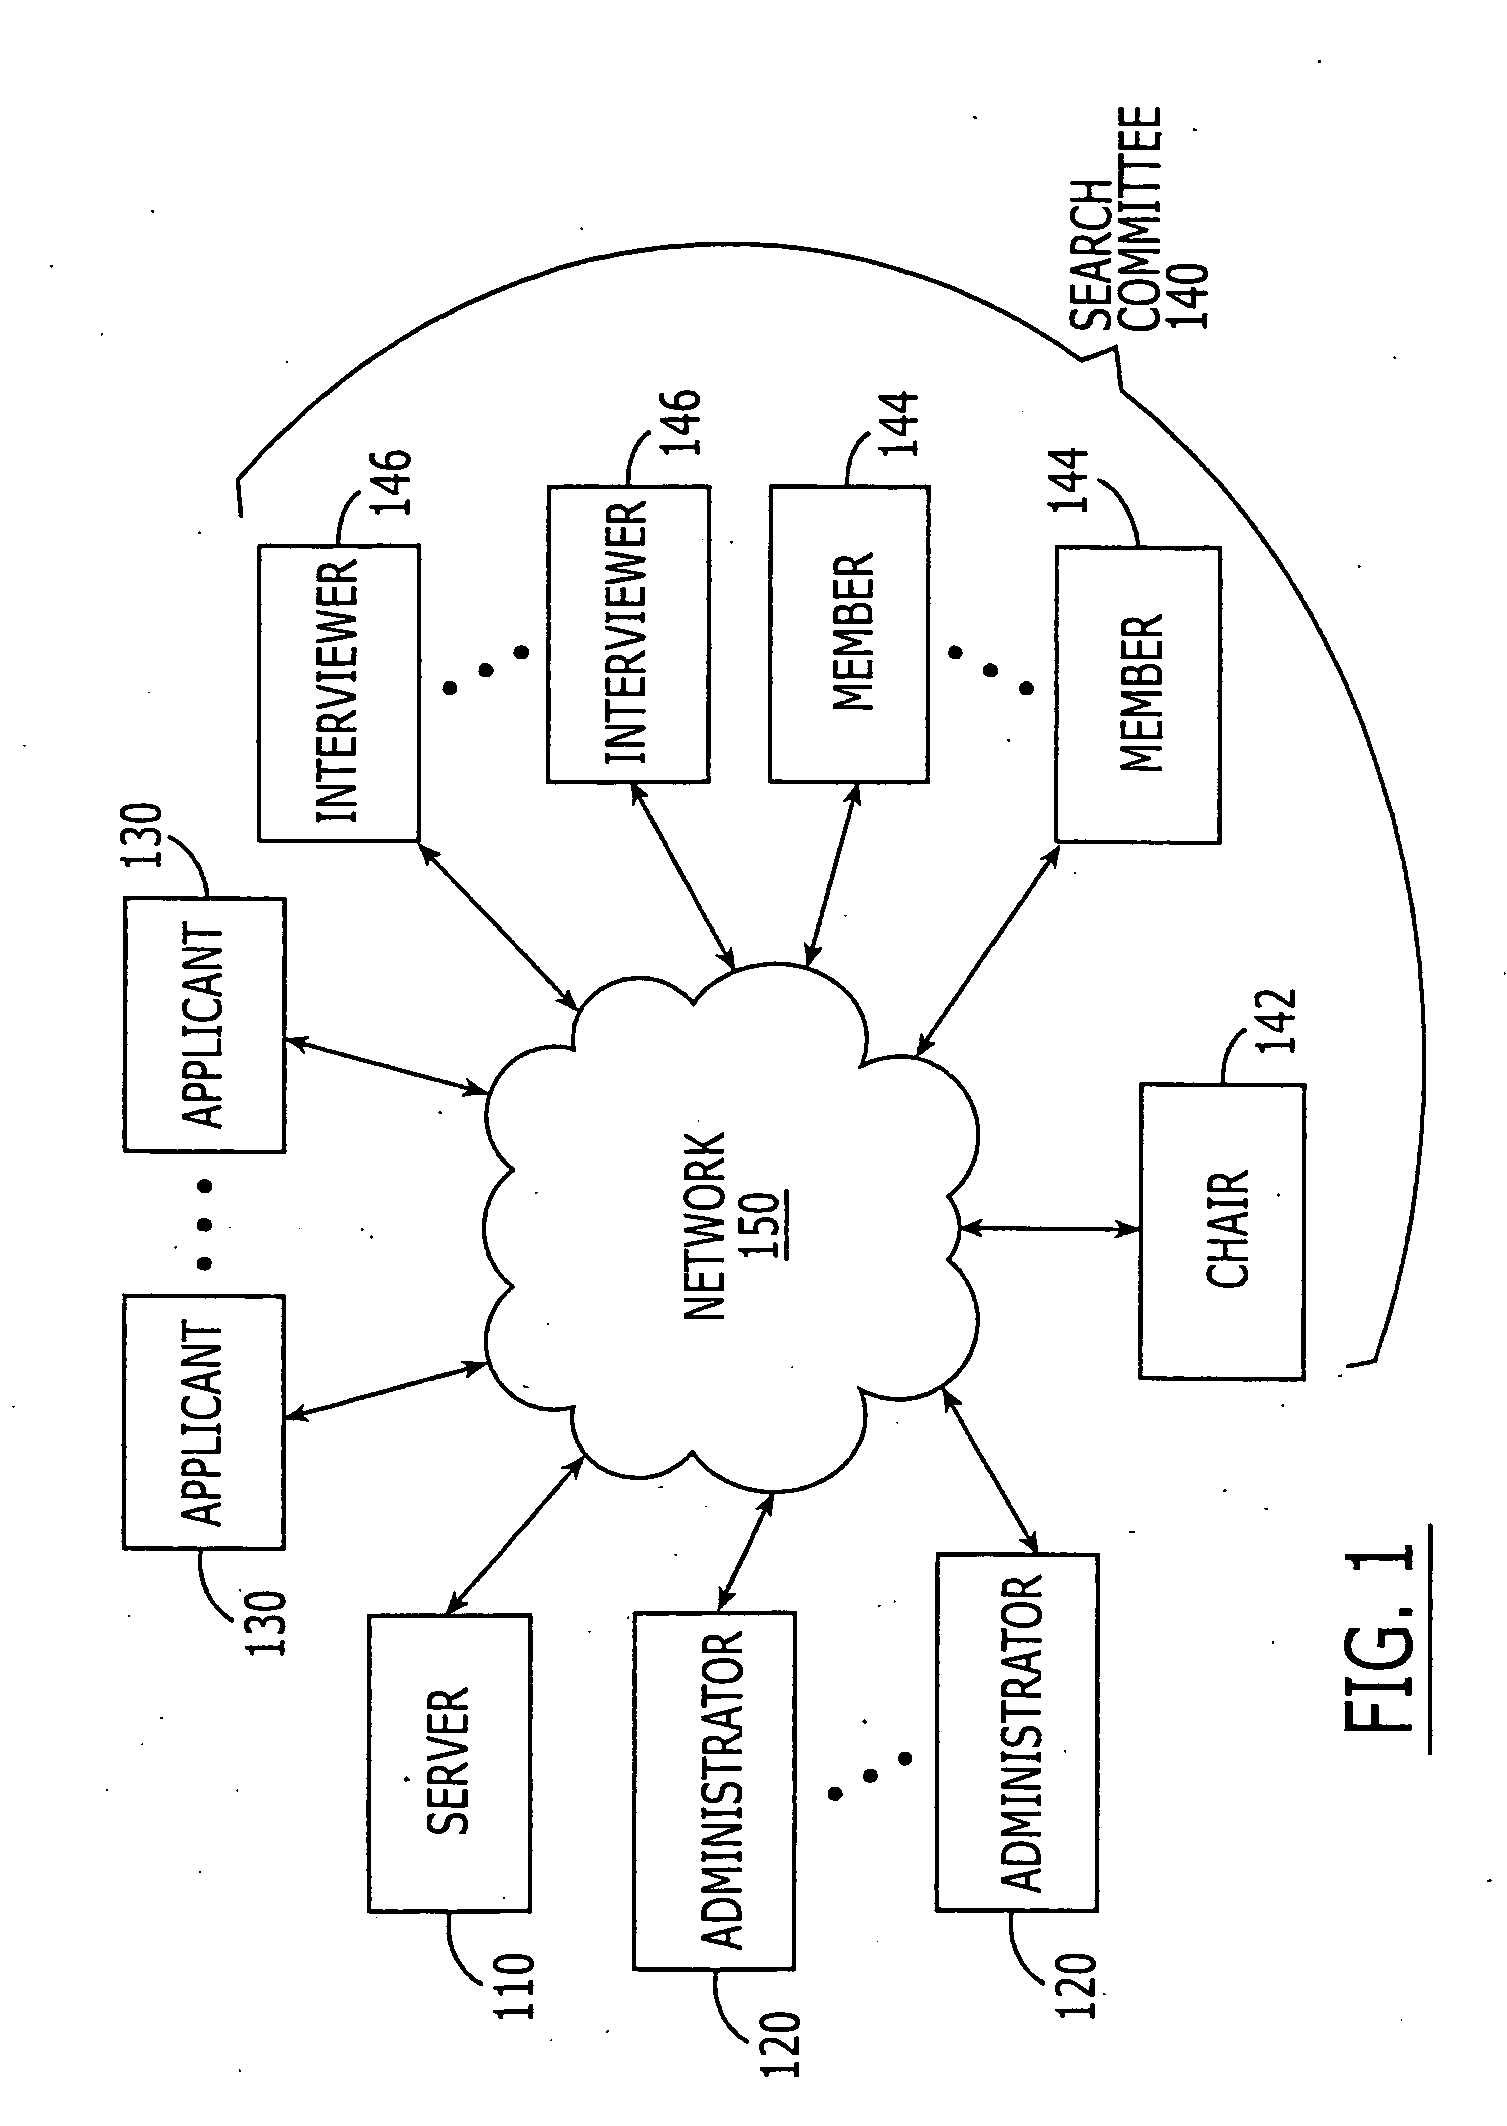 Systems, methods and computer program products for facilitating evaluation of job applicants by search committees